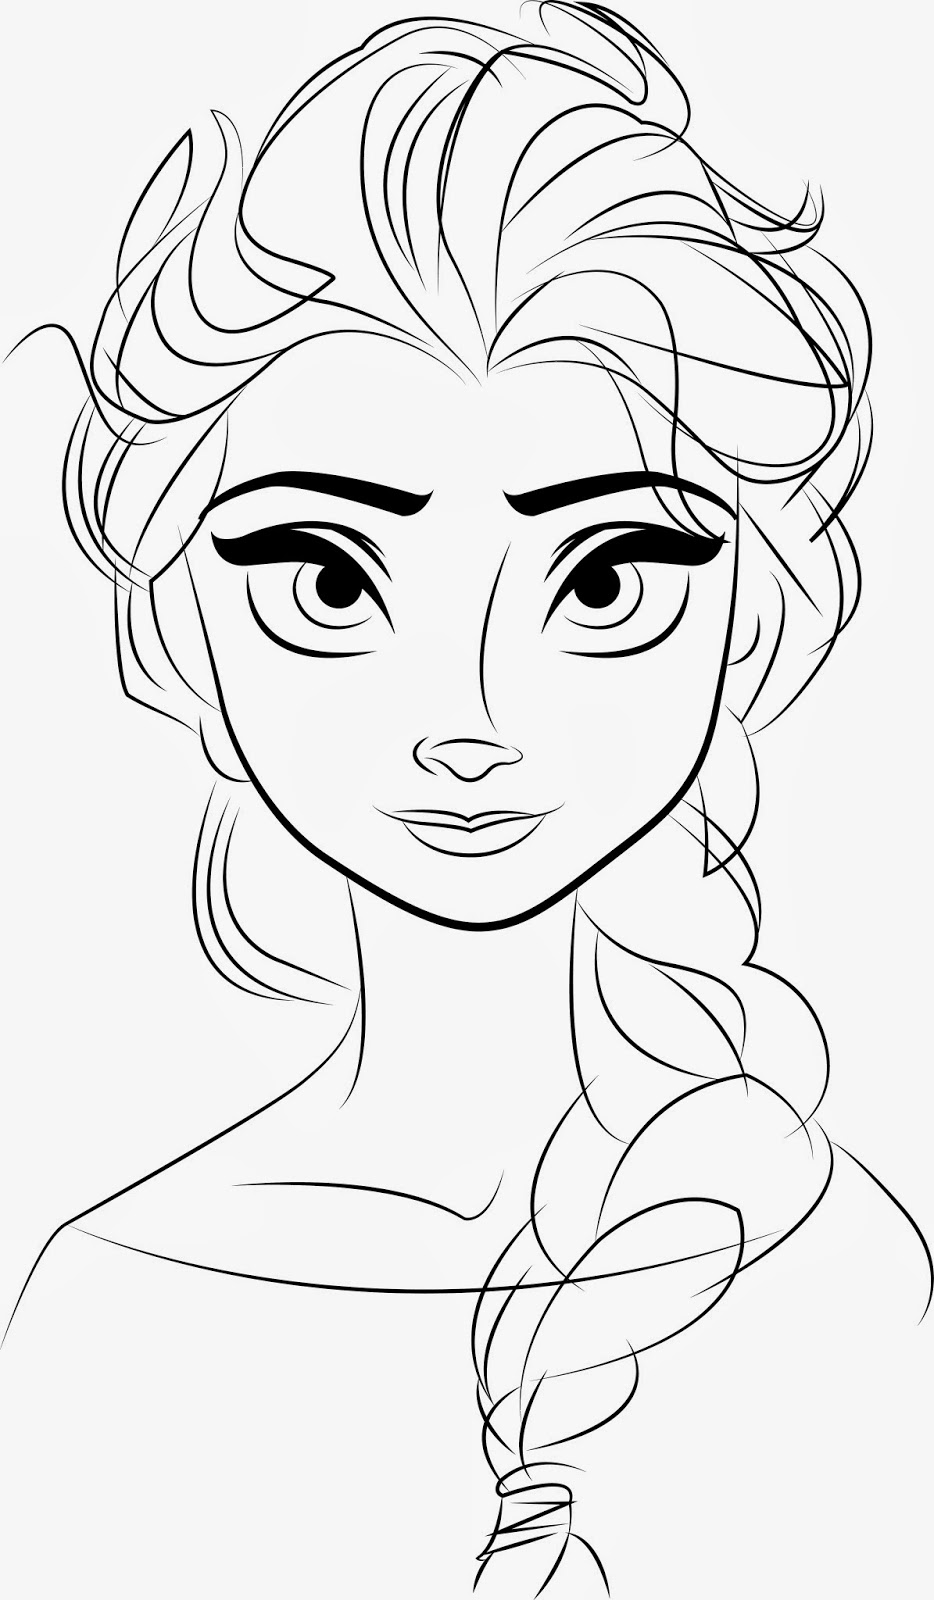 Free Printable Elsa Coloring Pages for Kids Best Coloring Pages For Kids